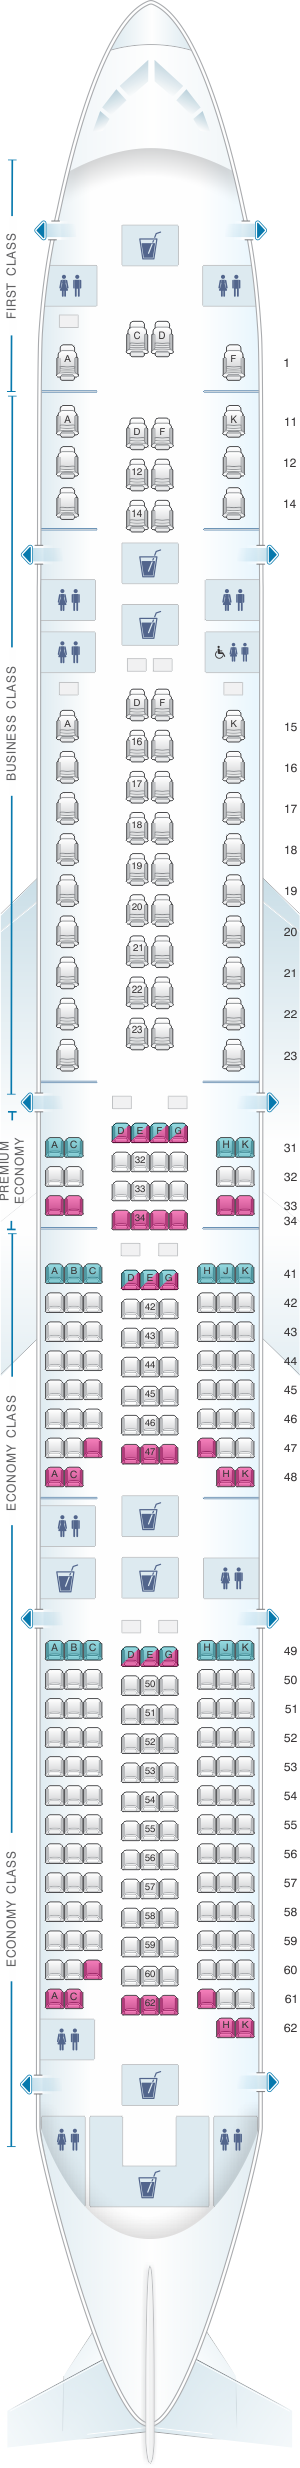 Seat Map Singapore Airlines Boeing B777 300ER four class | SeatMaestro